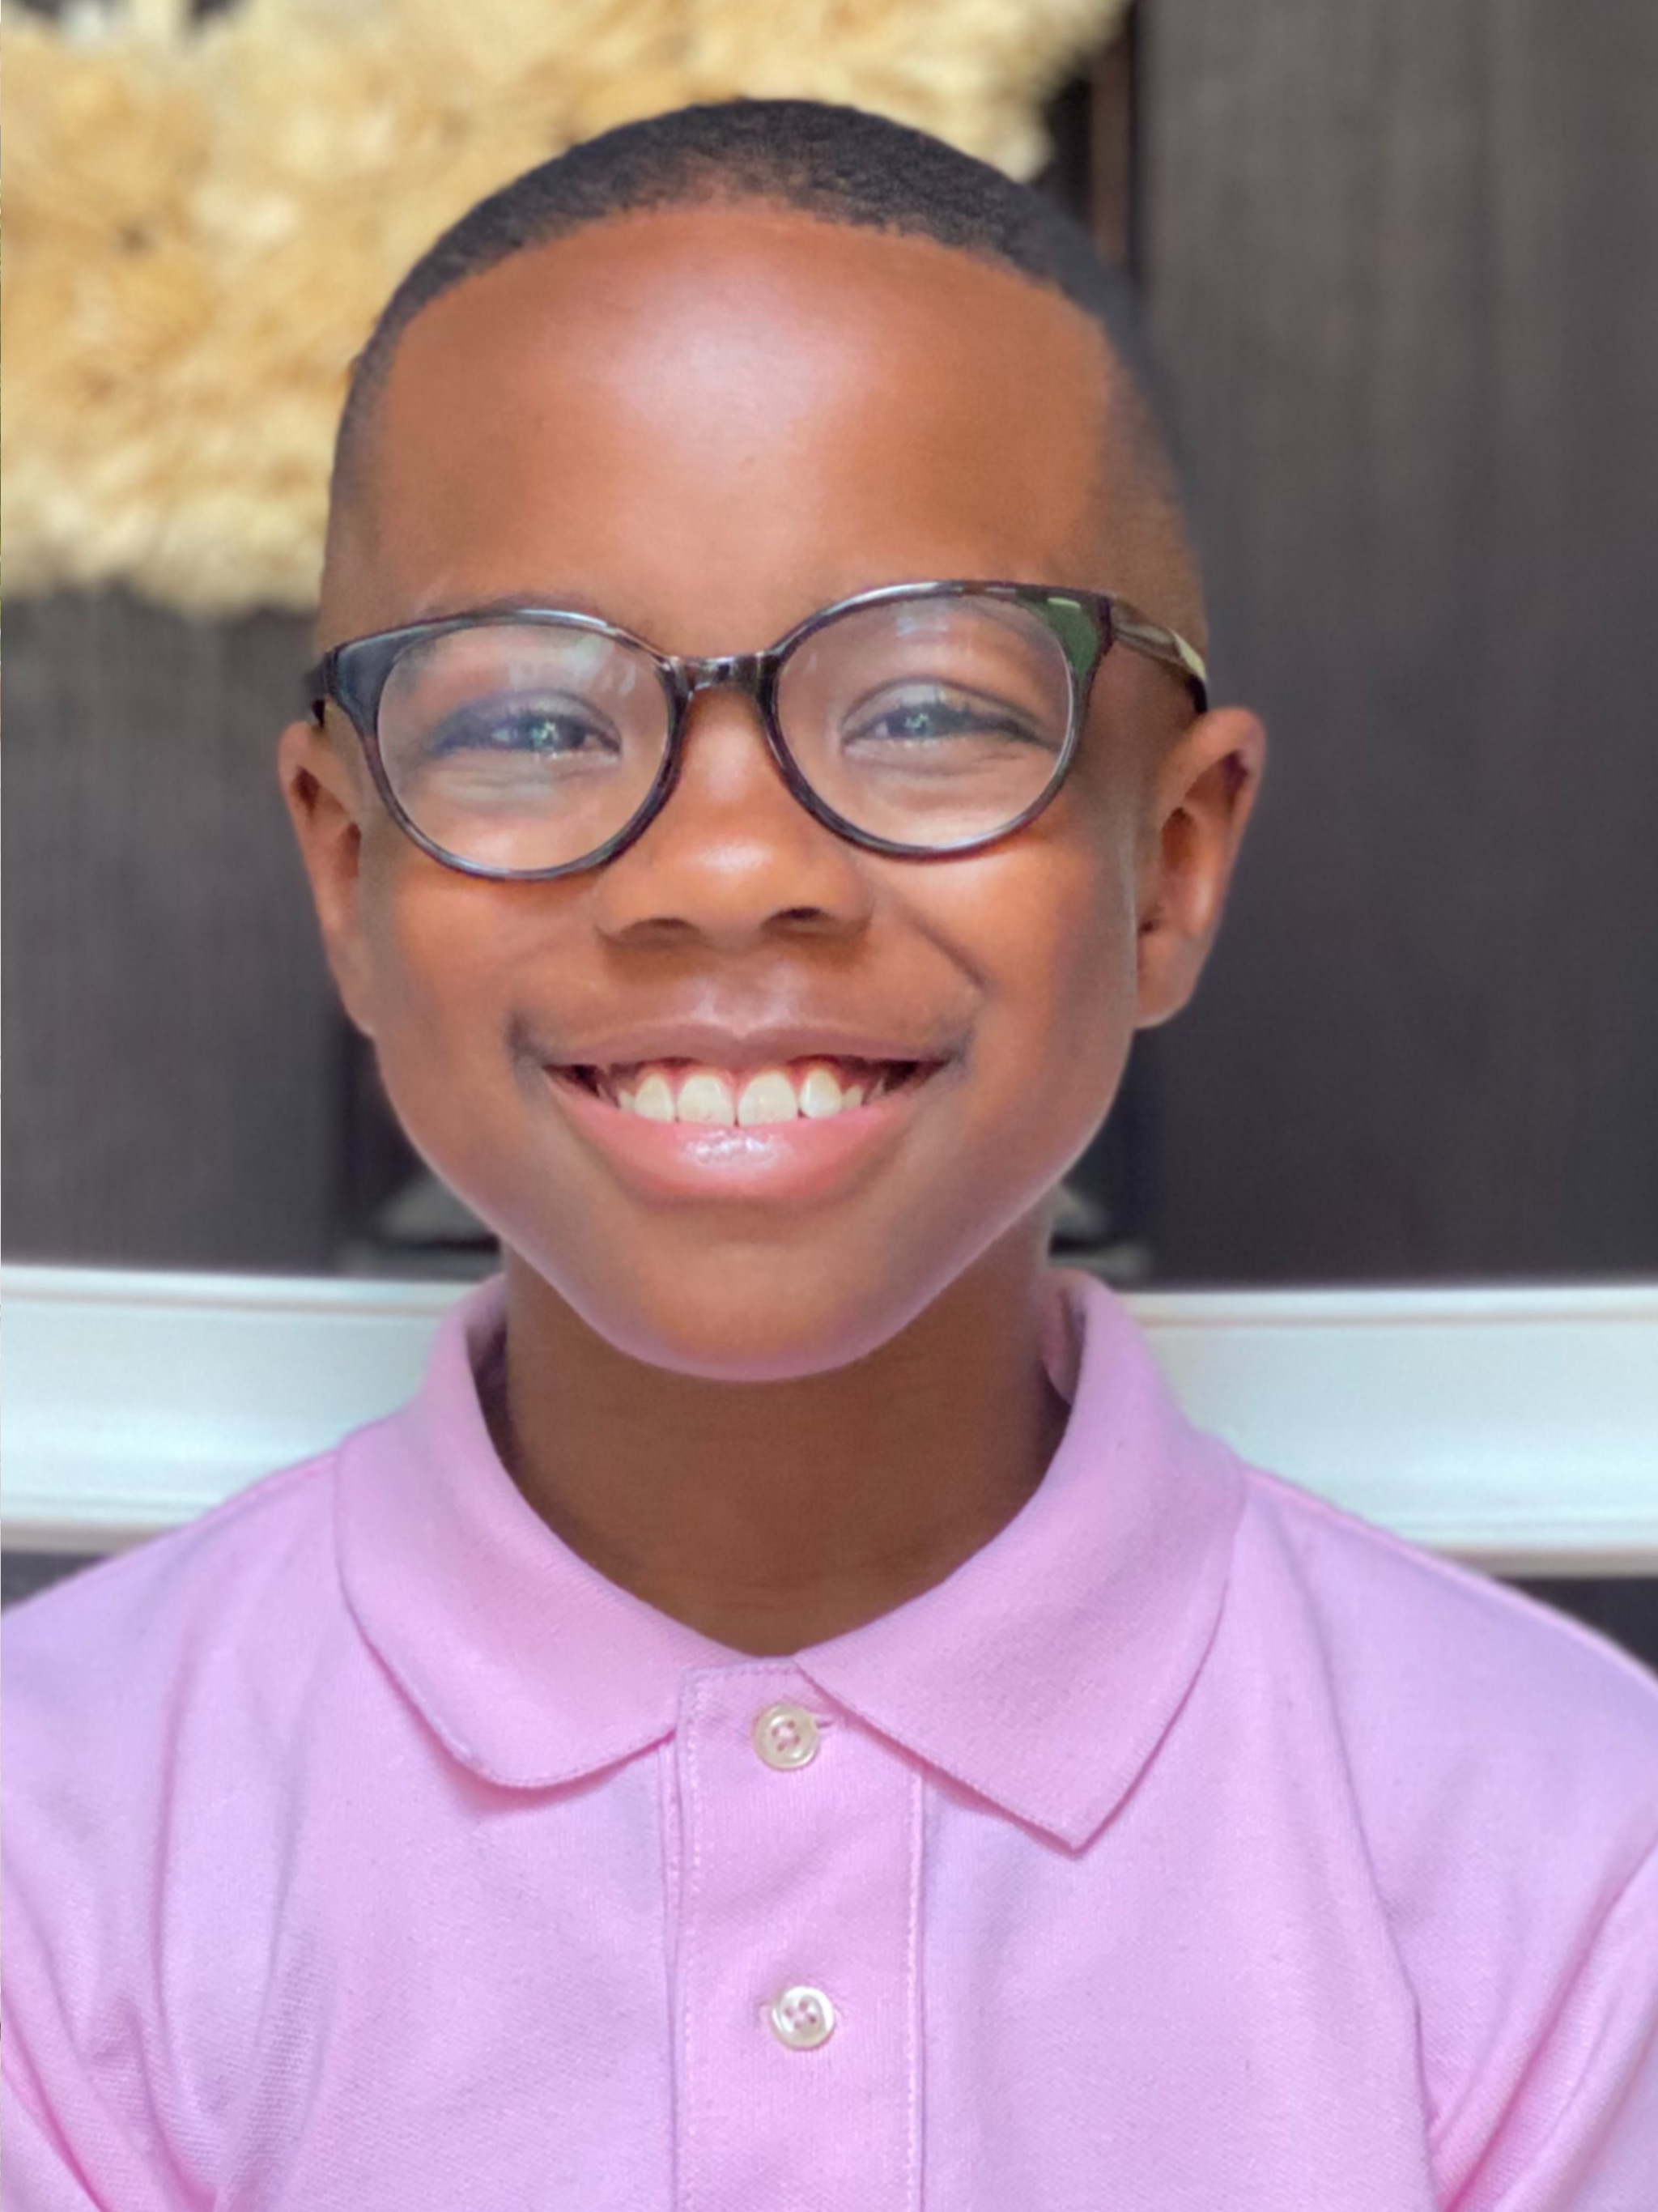 My name is Orion Jean. I am 10 years old and in the 5th grade. I enjoy reading, listening to music and playing with my little brother. In July 2020, I was selected as the National Kindness Speech Contest Winner. Upon winning, I decided I wanted to create my own 